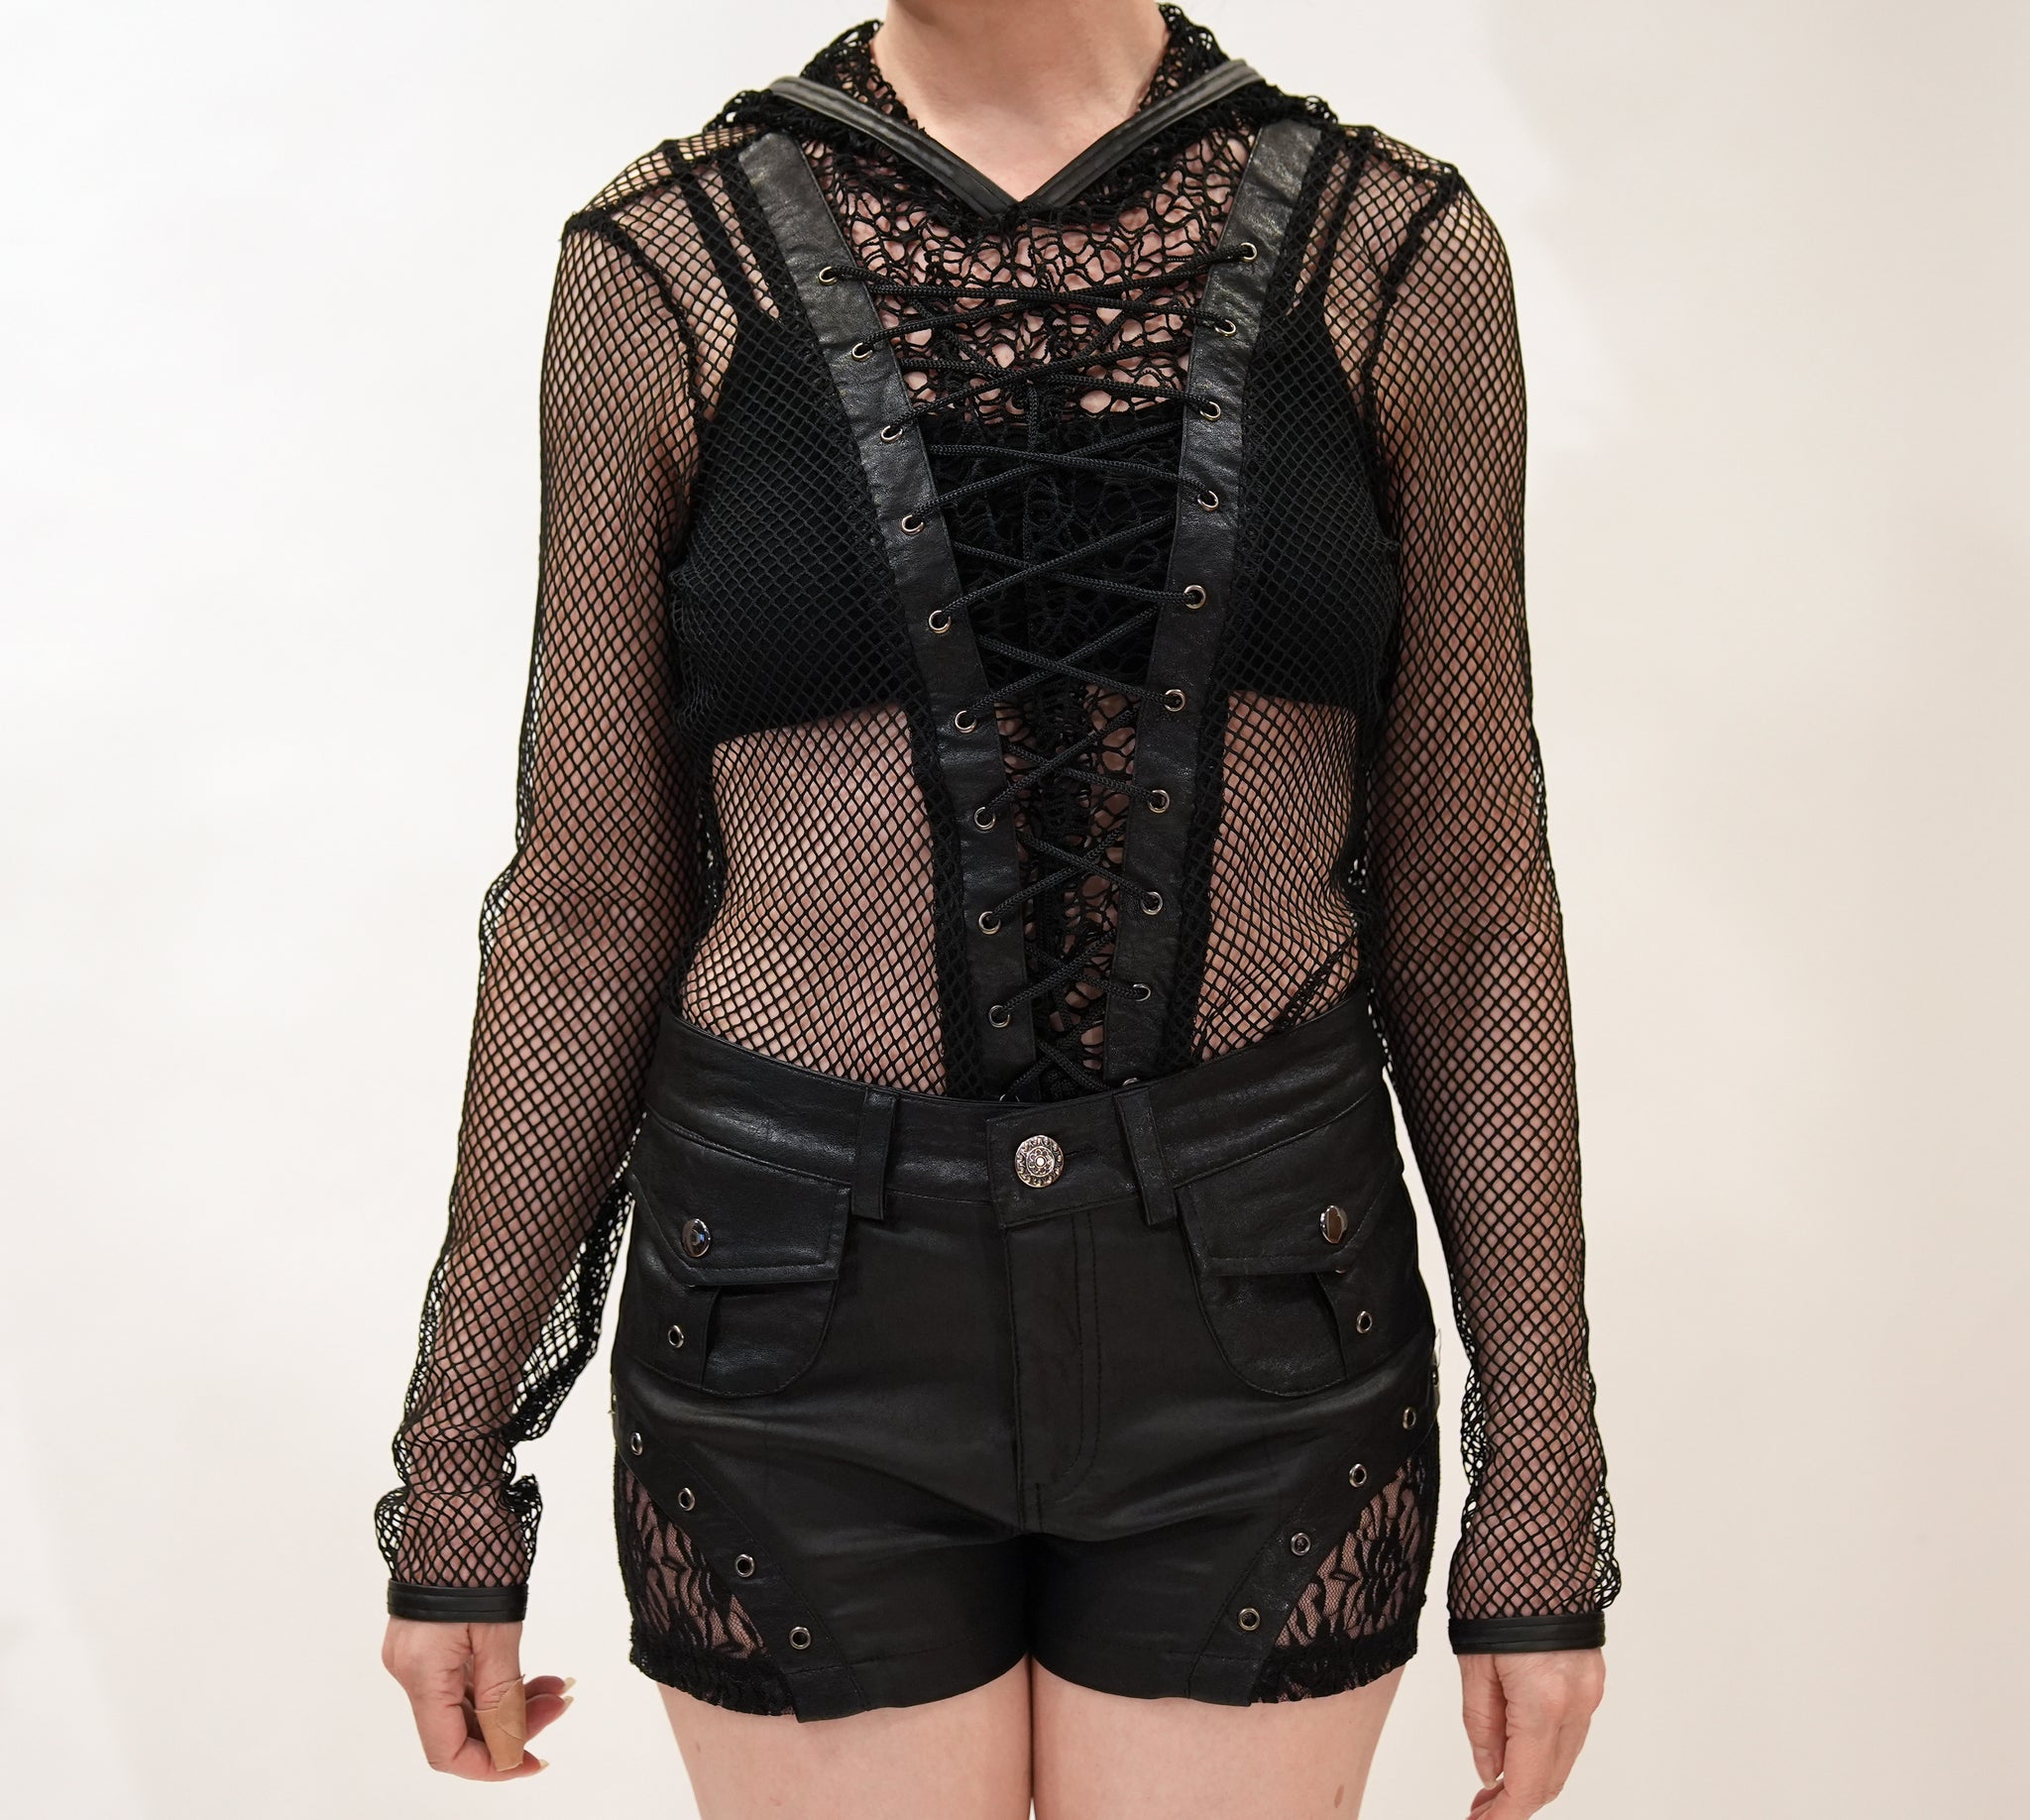 Gothic Hooded Lace-Up Fishnet Women's Shirt – Bloody Rose Boutique